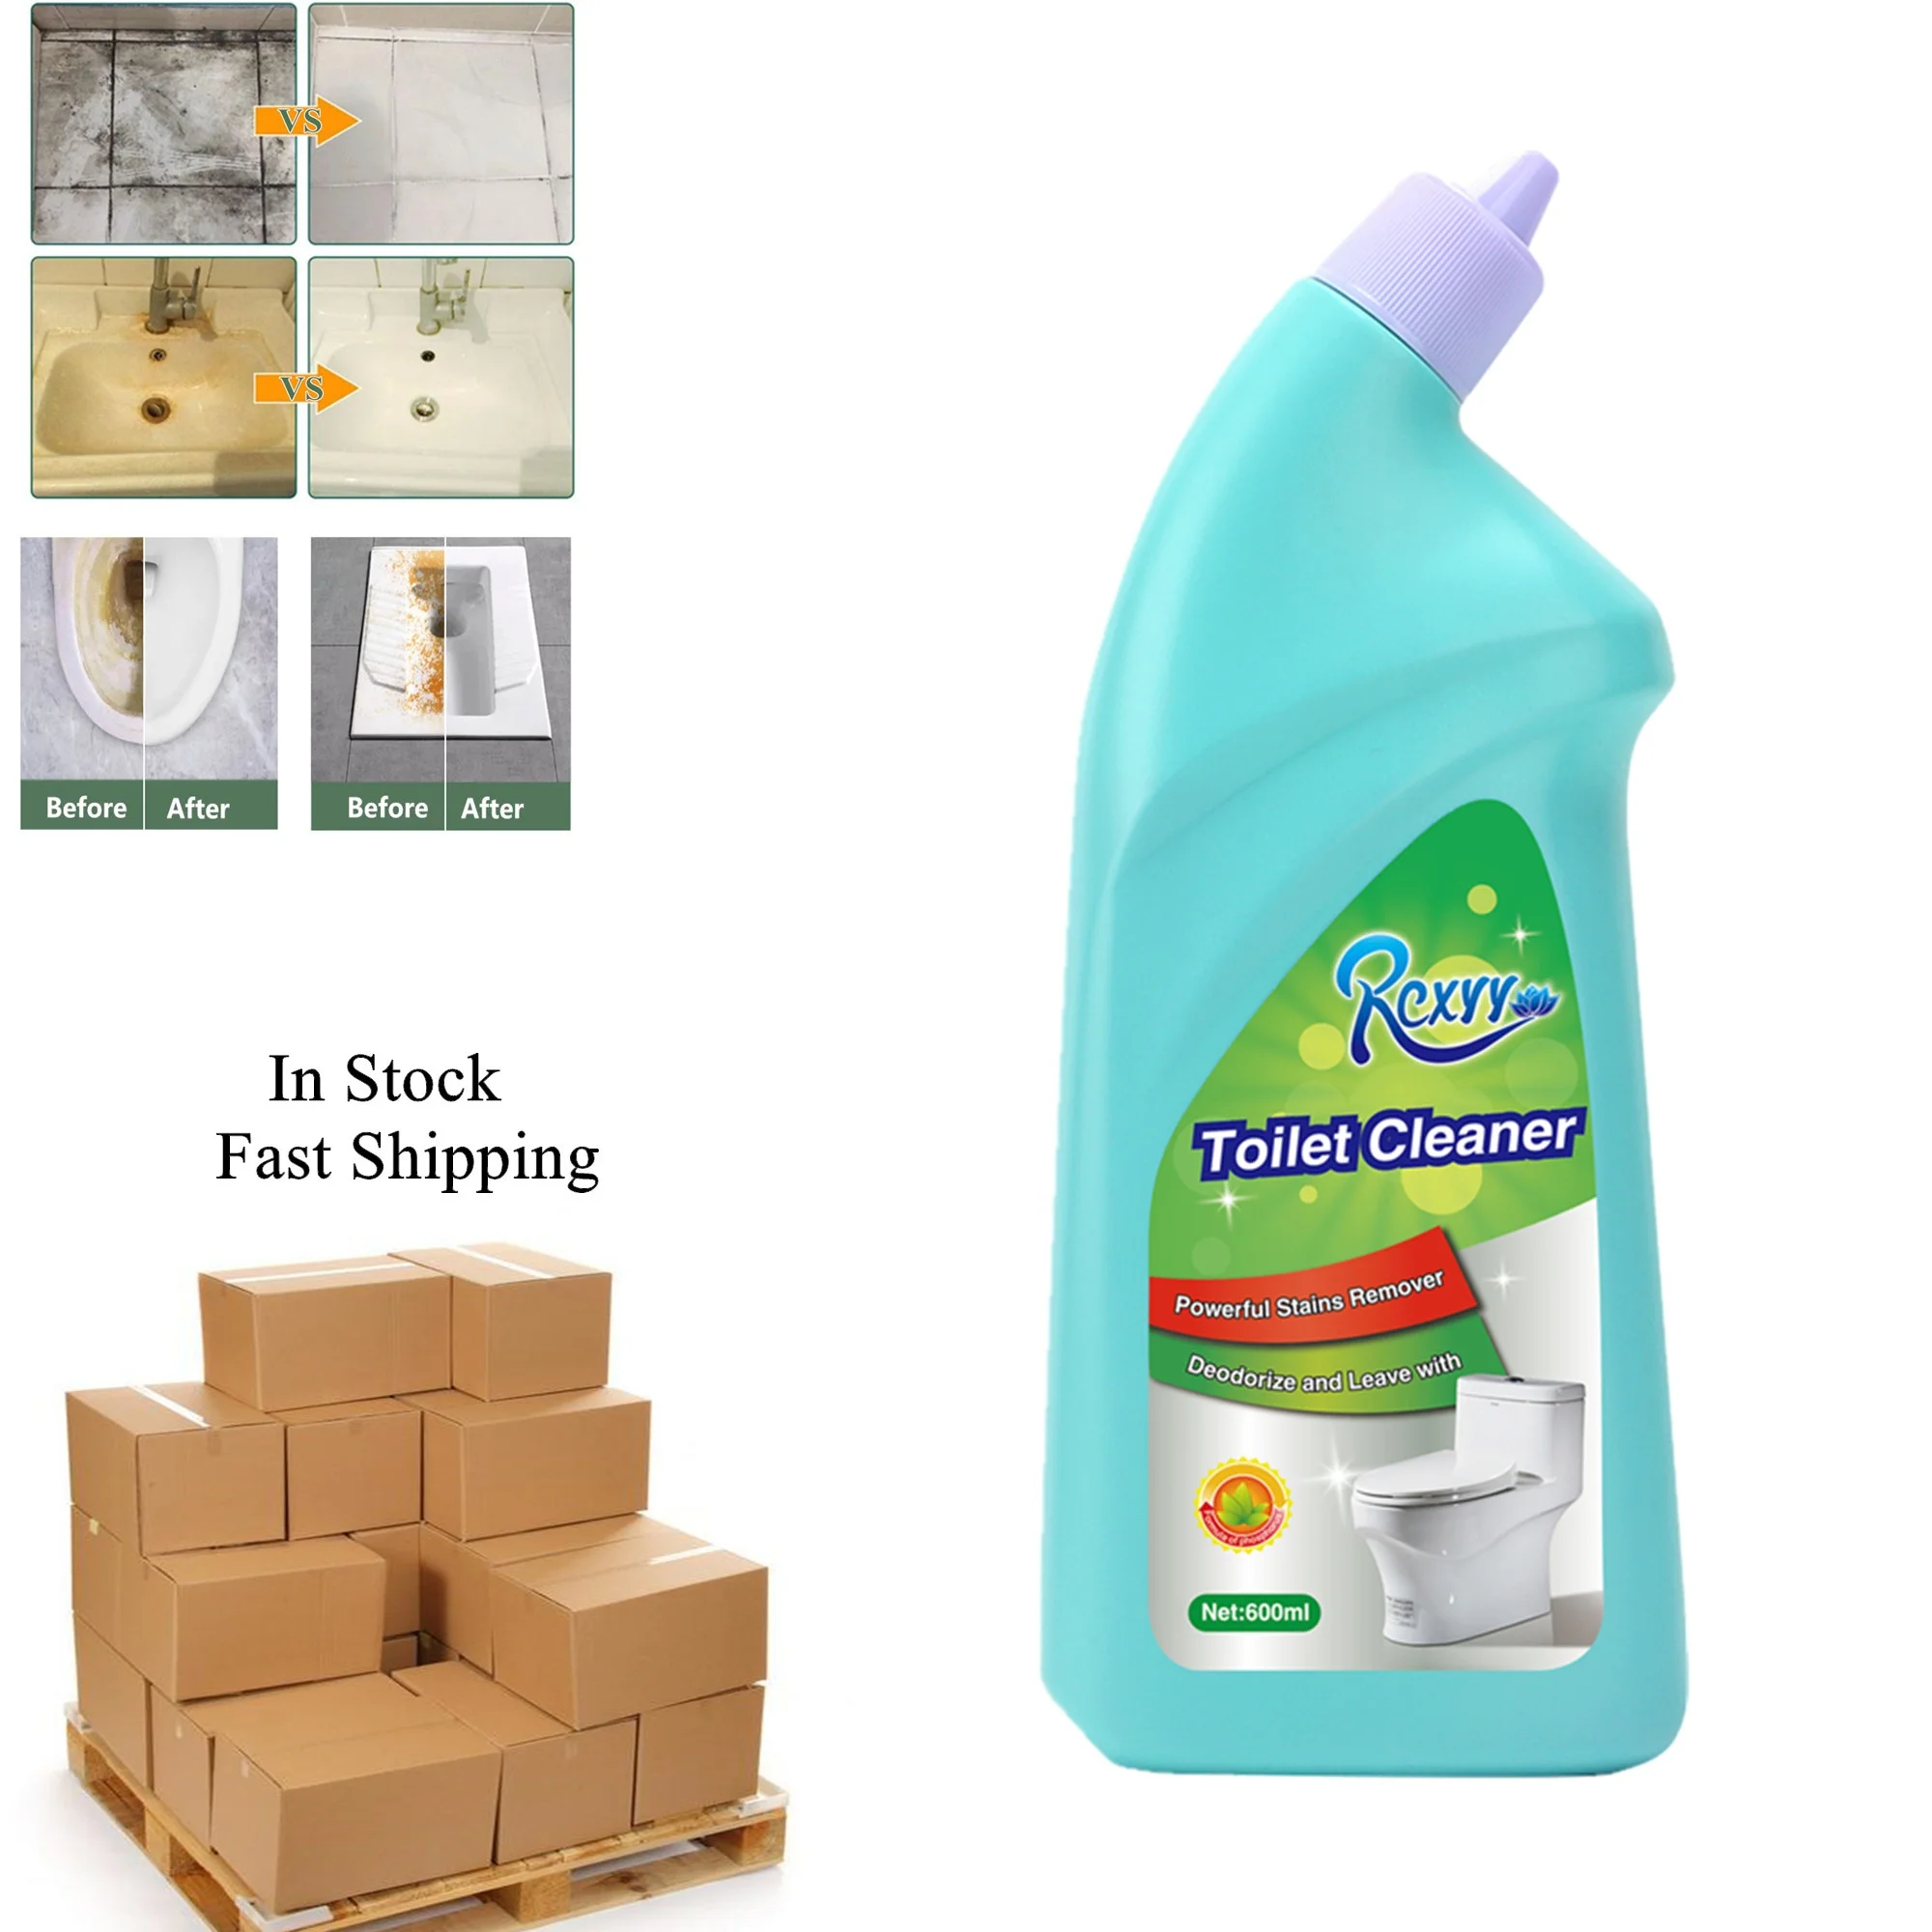 

In Stock Retail Household Good Effects Powerful Remove Stubborn Urine Stains Anti-bacterial Deodorizing Toilet Bowl Cleaner, Green